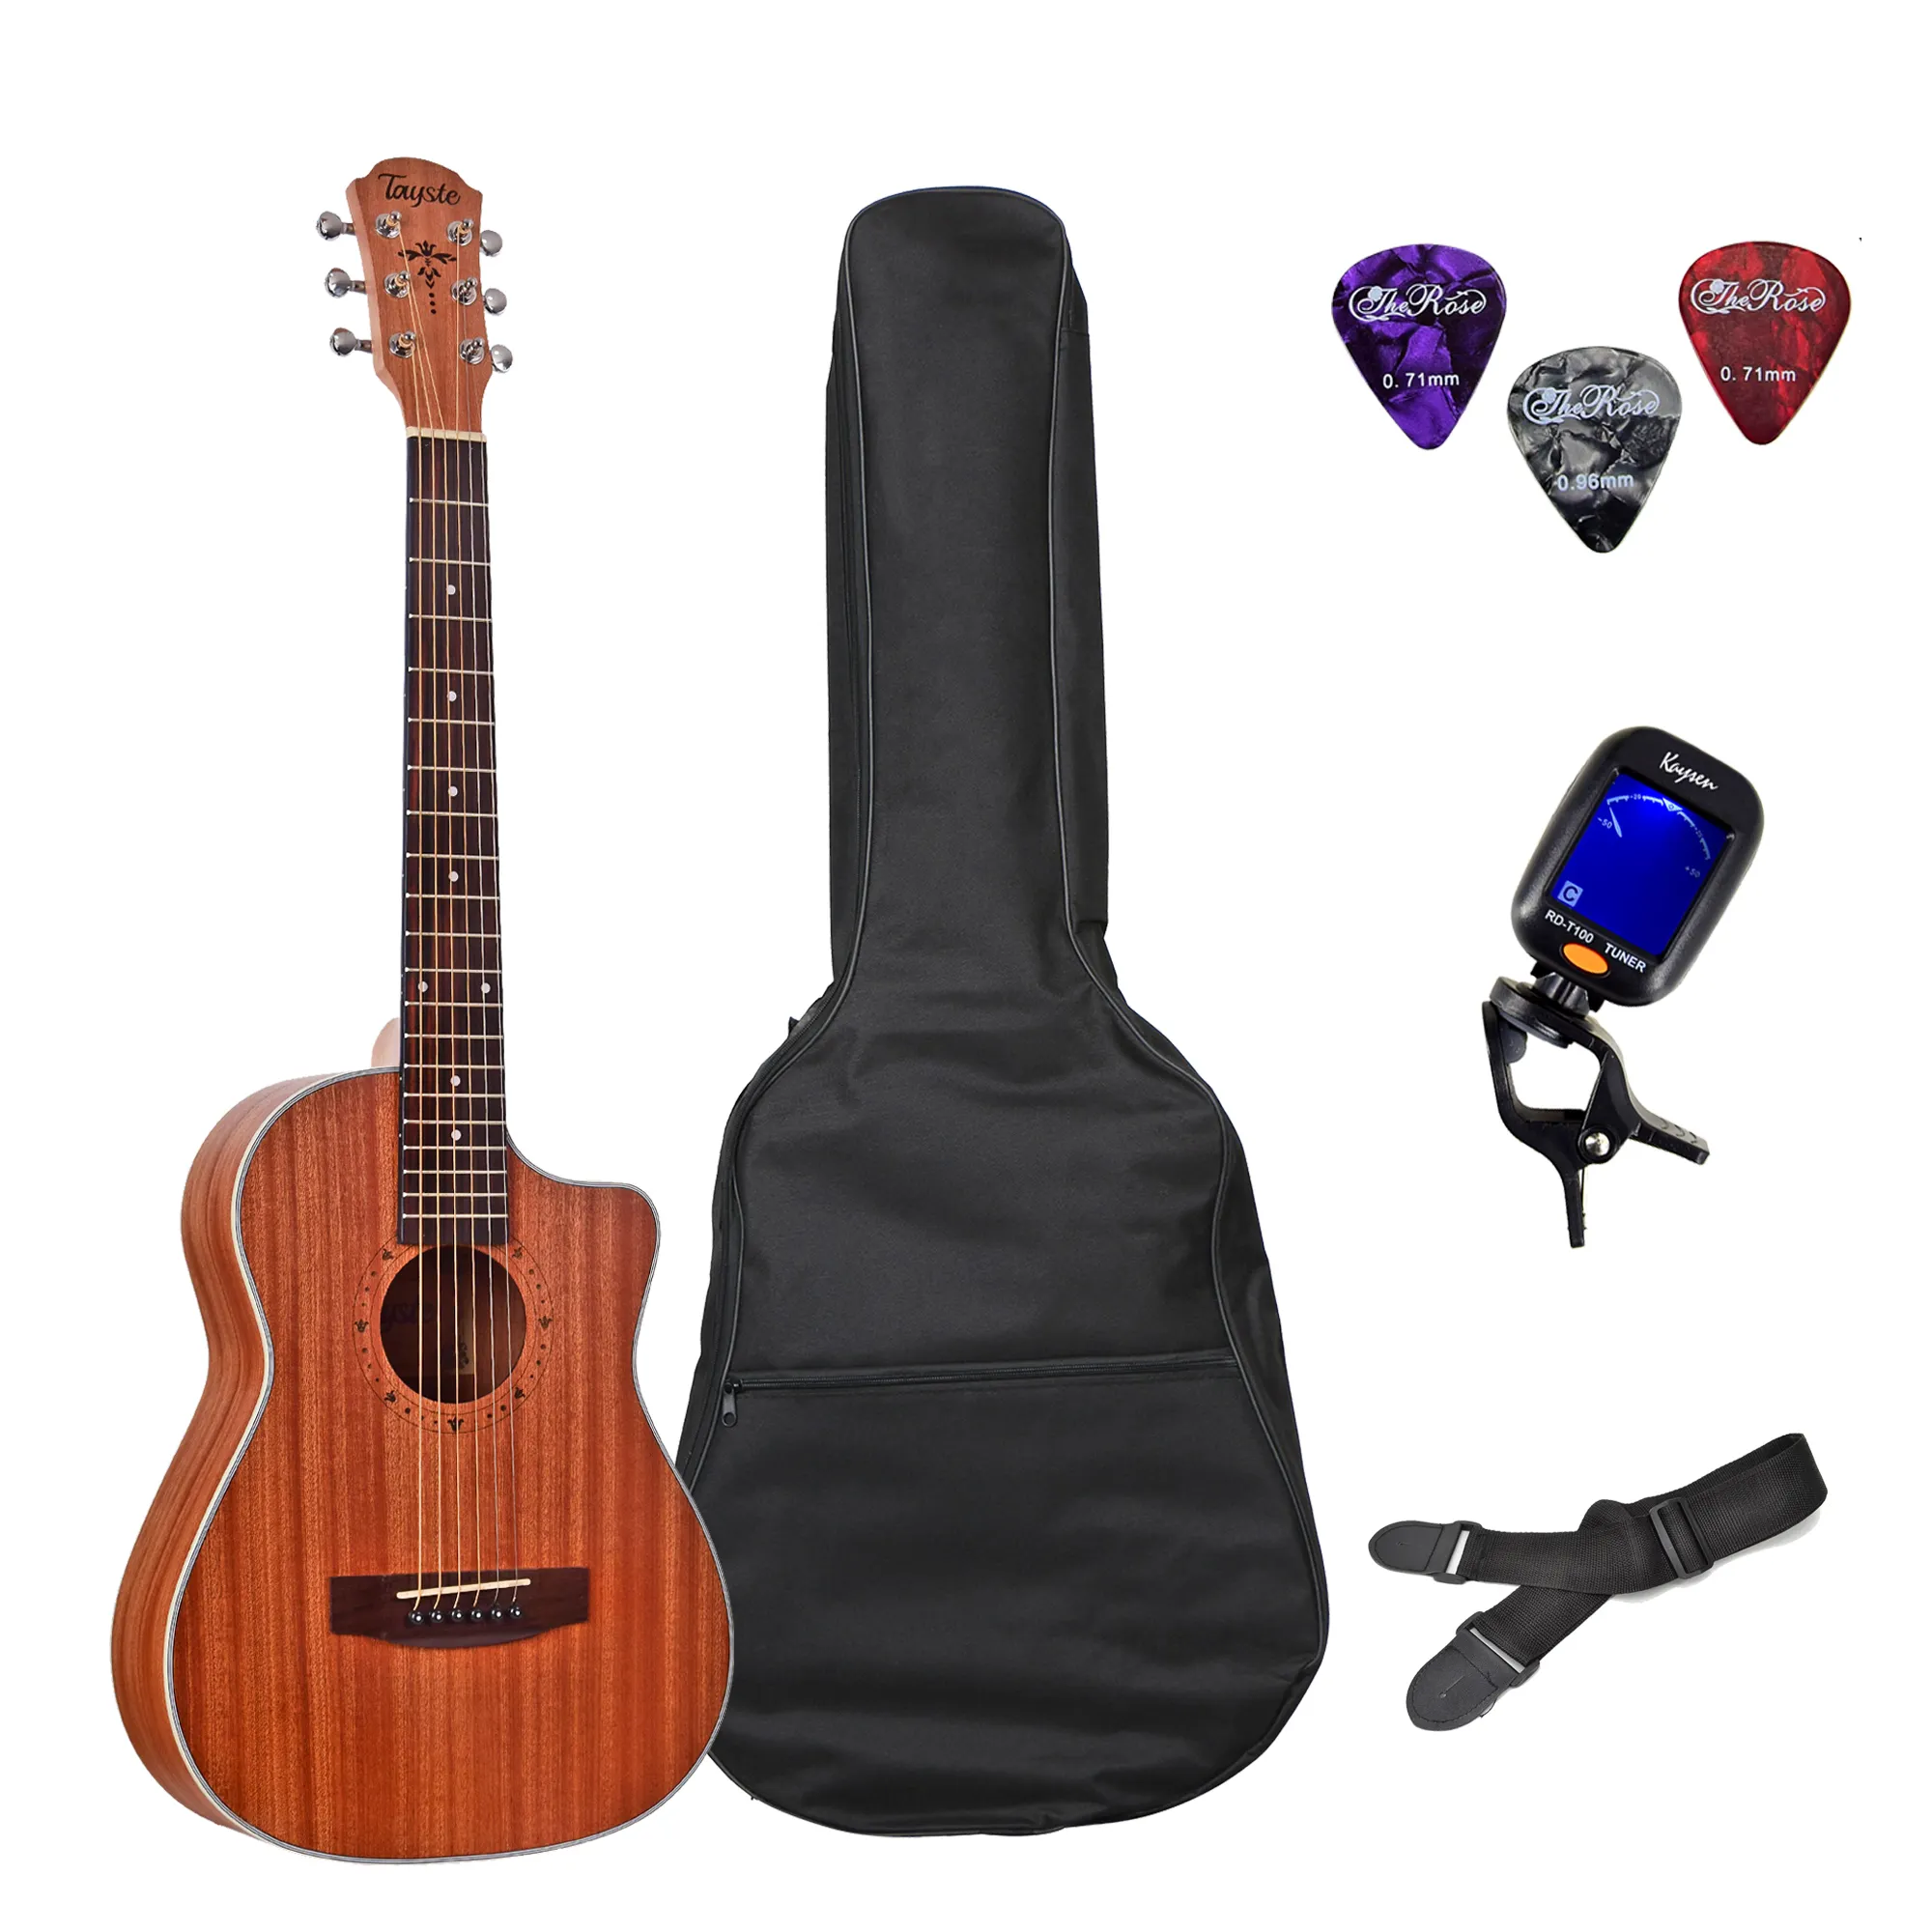 Wholesale 34" Travel Acoustic Guitar Child Mini with picks, straps, tuner